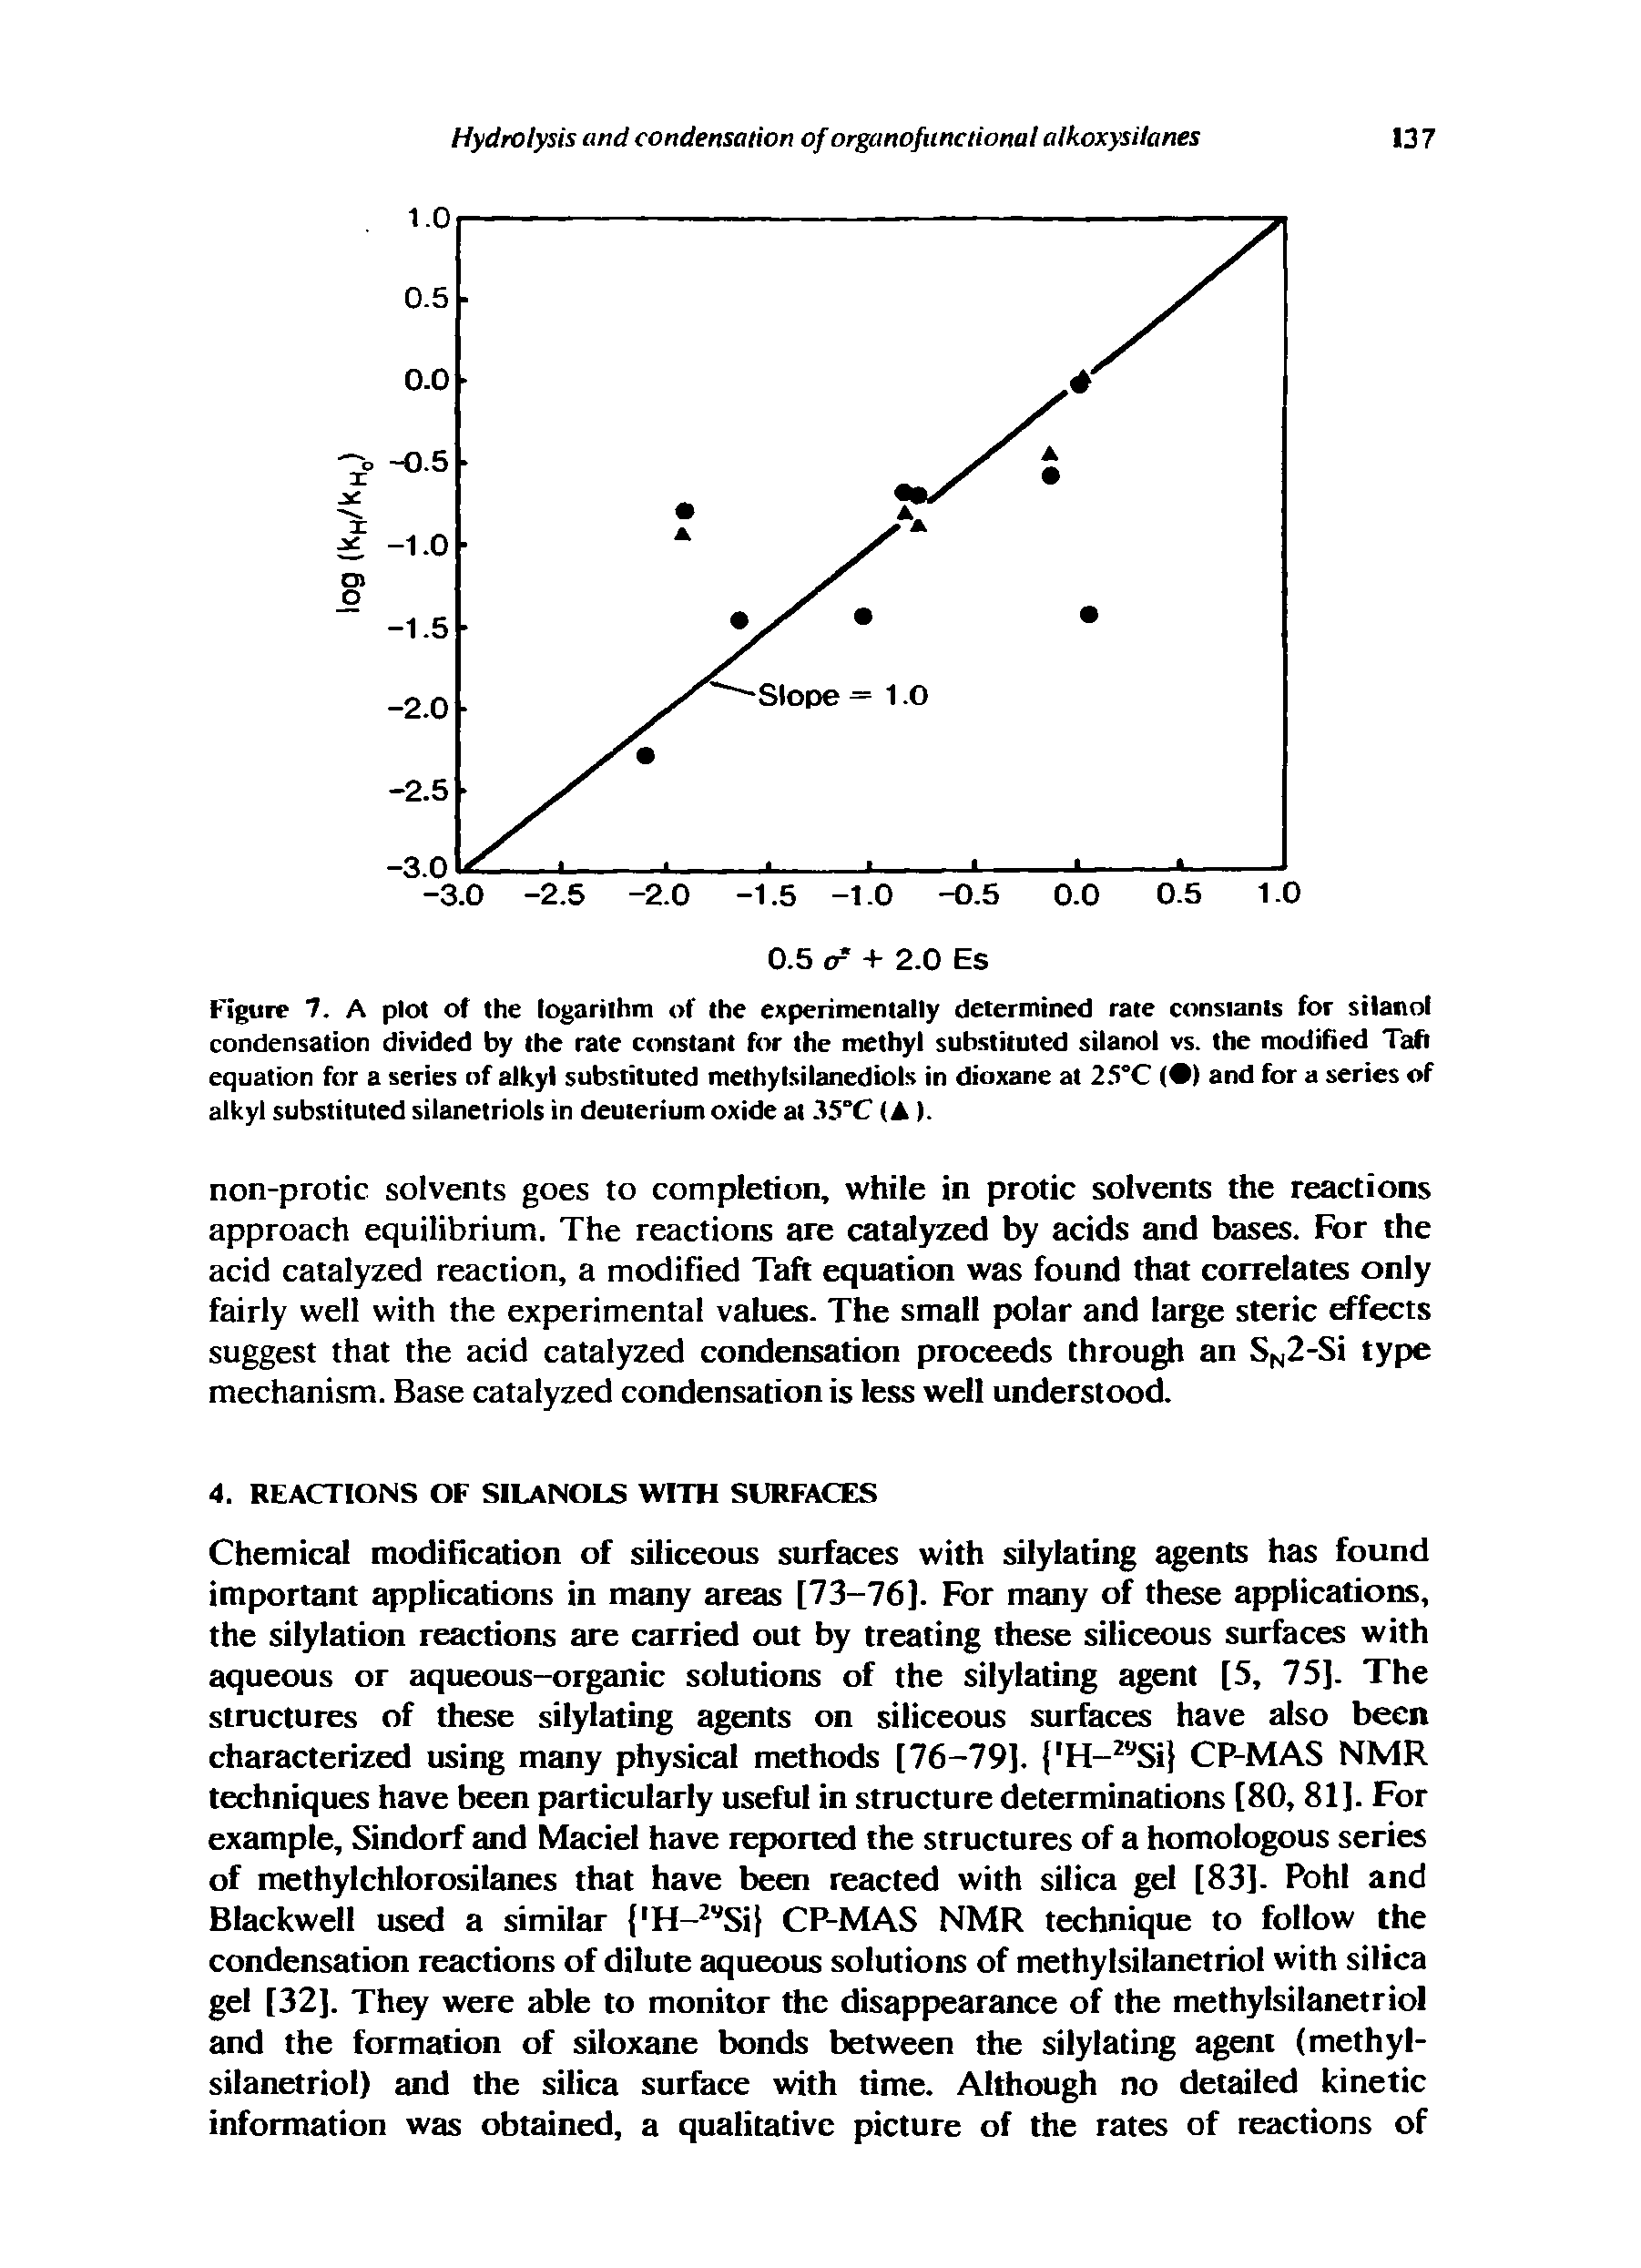 Figure 7. A plot of the logarithm of the experimentally determined rate consiants for silanol condensation divided by the rate constant for the methyl substituted silanol vs. the modified Taft equation for a series of alkyl substituted methylsilanediols in dioxane at 25°C ( ) and for a series of alkyl substituted silanetriols in deuterium oxide at 35 C (A).